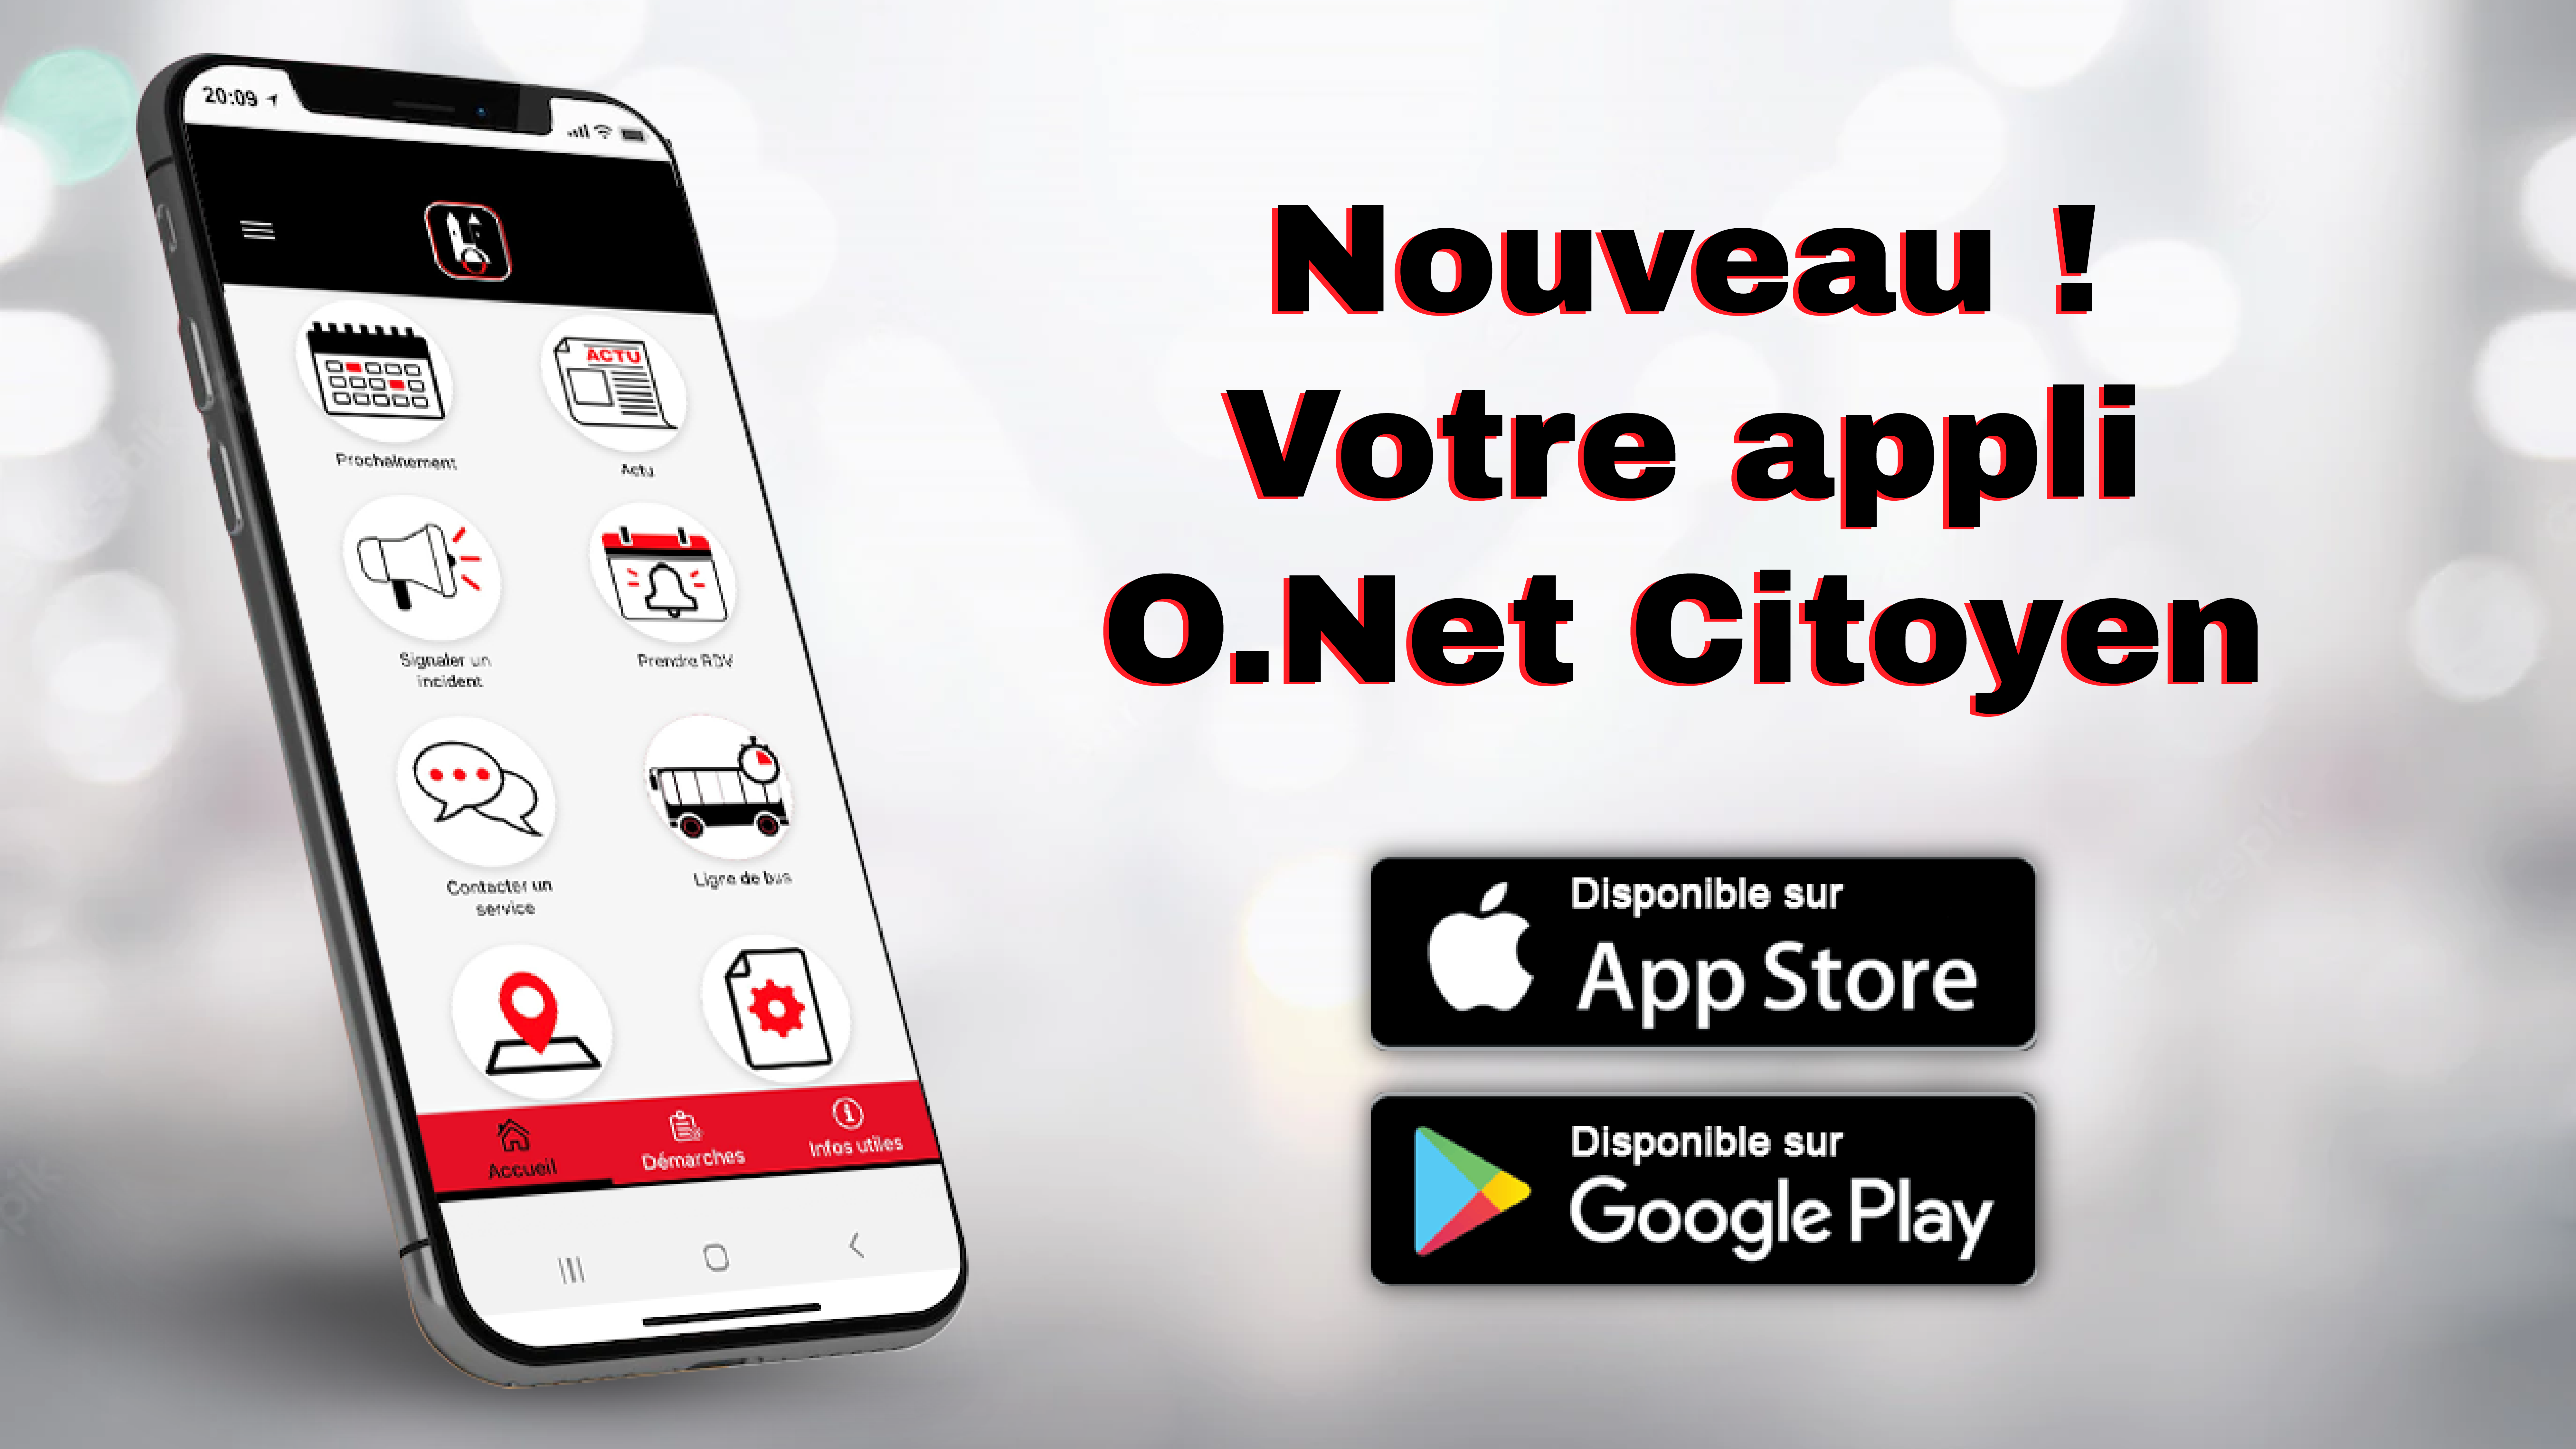 Onet on the App Store